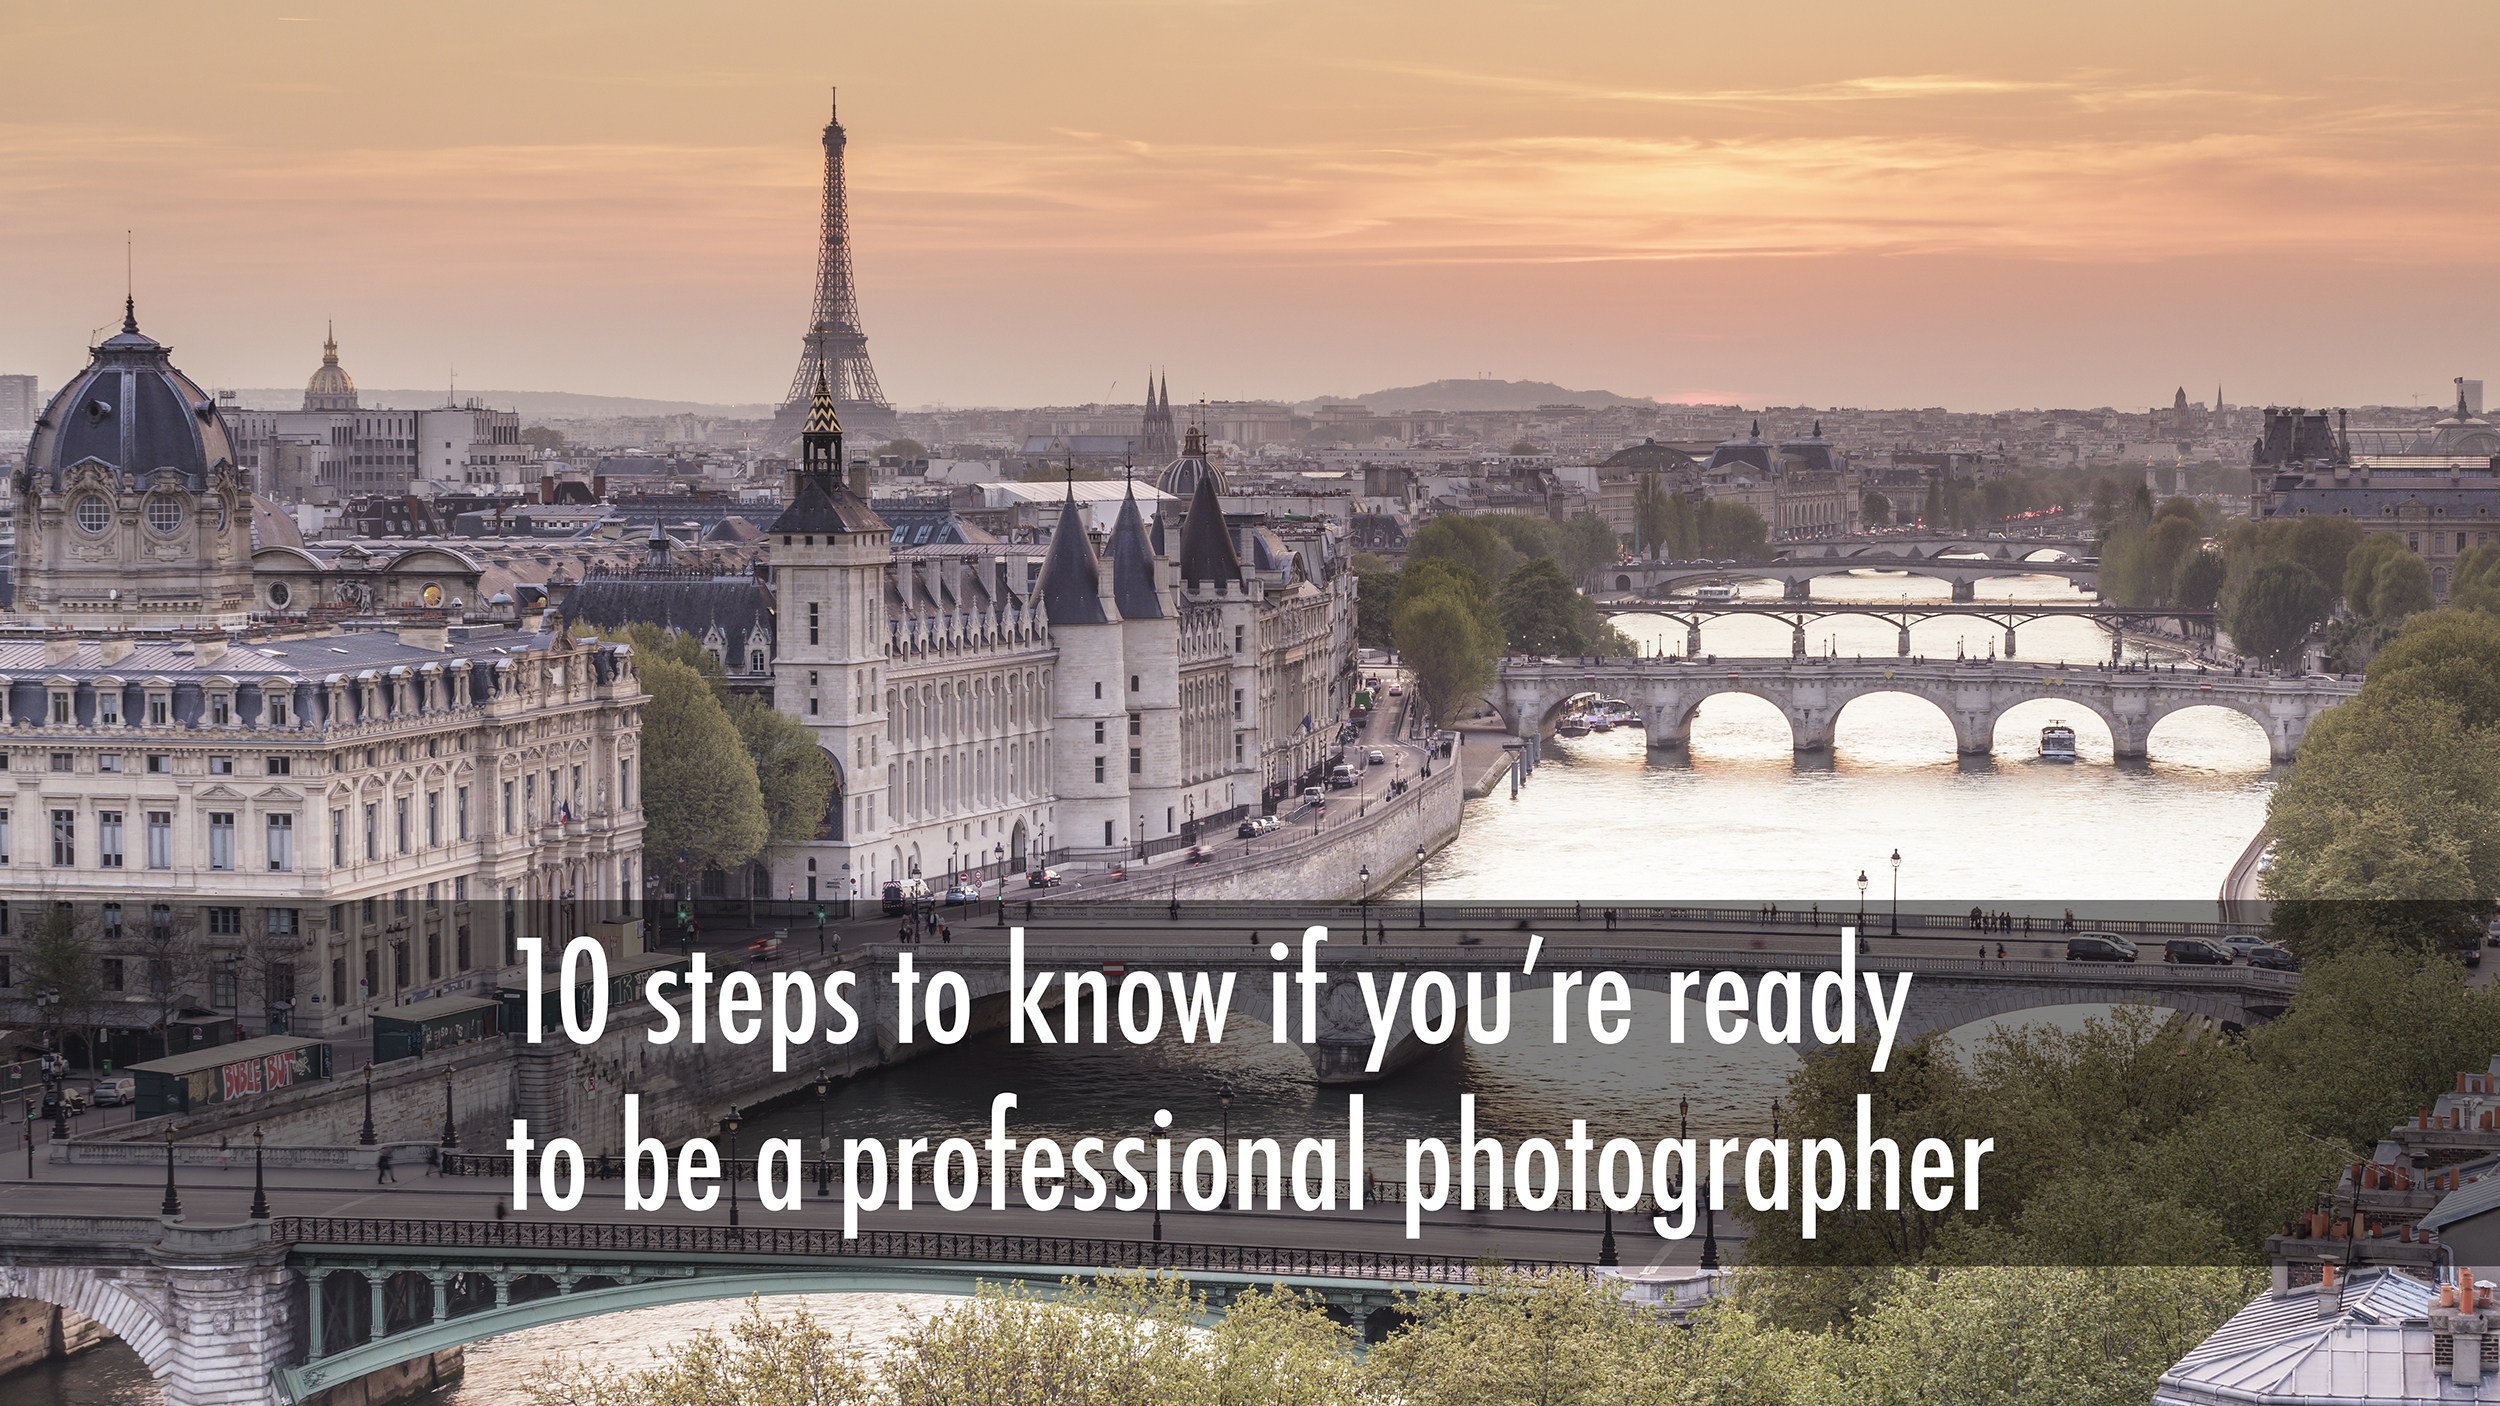 10 steps to know if you're ready to be a professional photographer